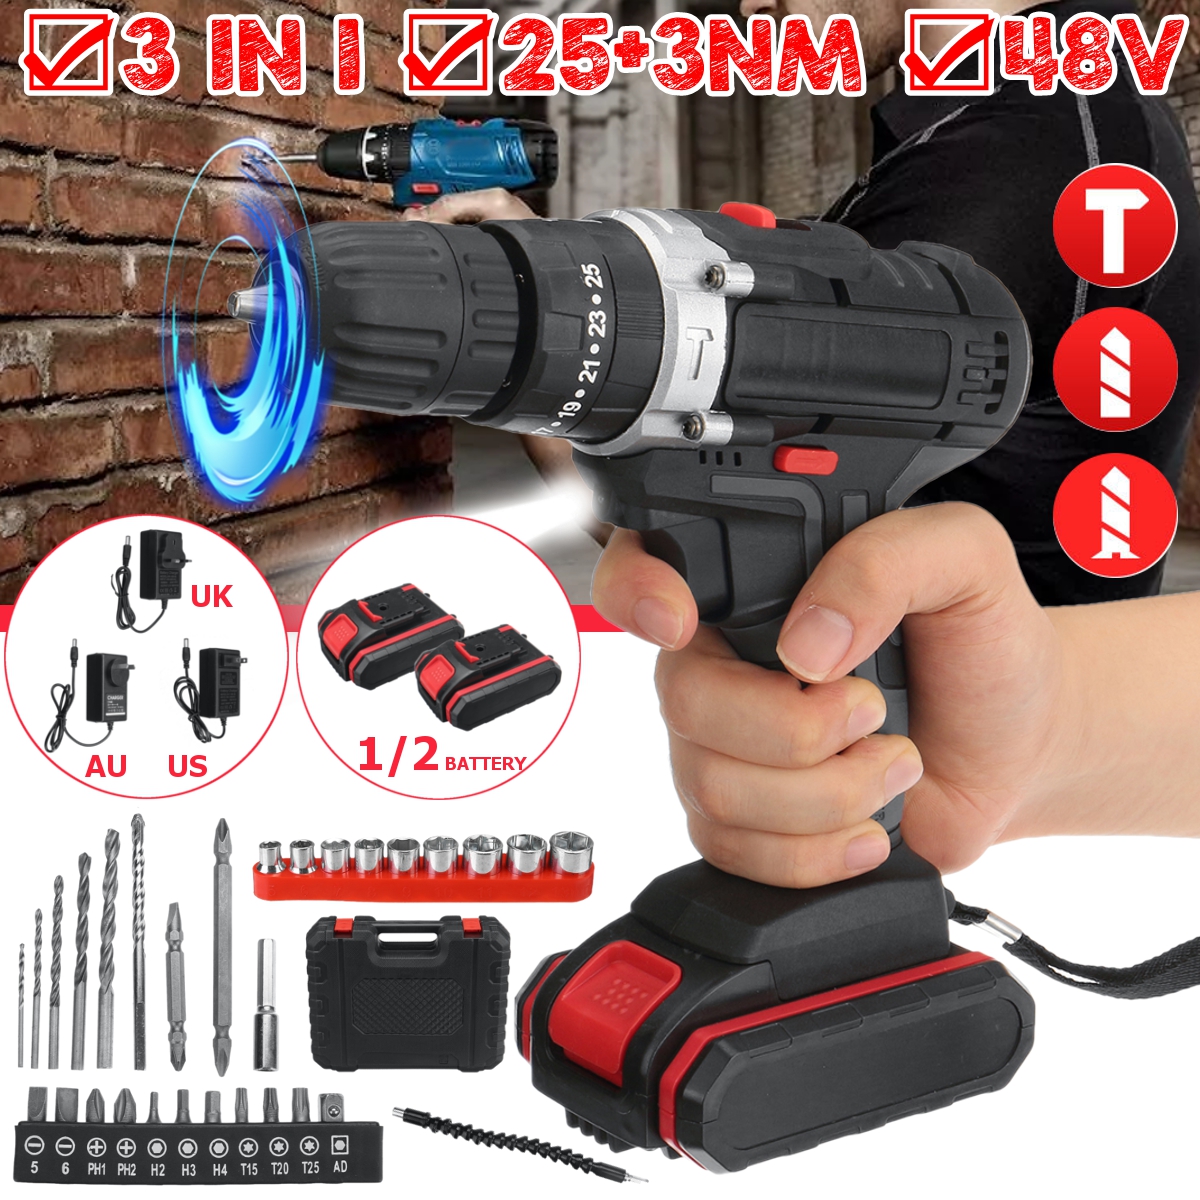 21V-22800mAh-Cordless-Rechargable-3-In-1-Power-Drills-Impact-Electric-Drill-Driver-With-1-Or2-Pcs-Ba-1877468-8